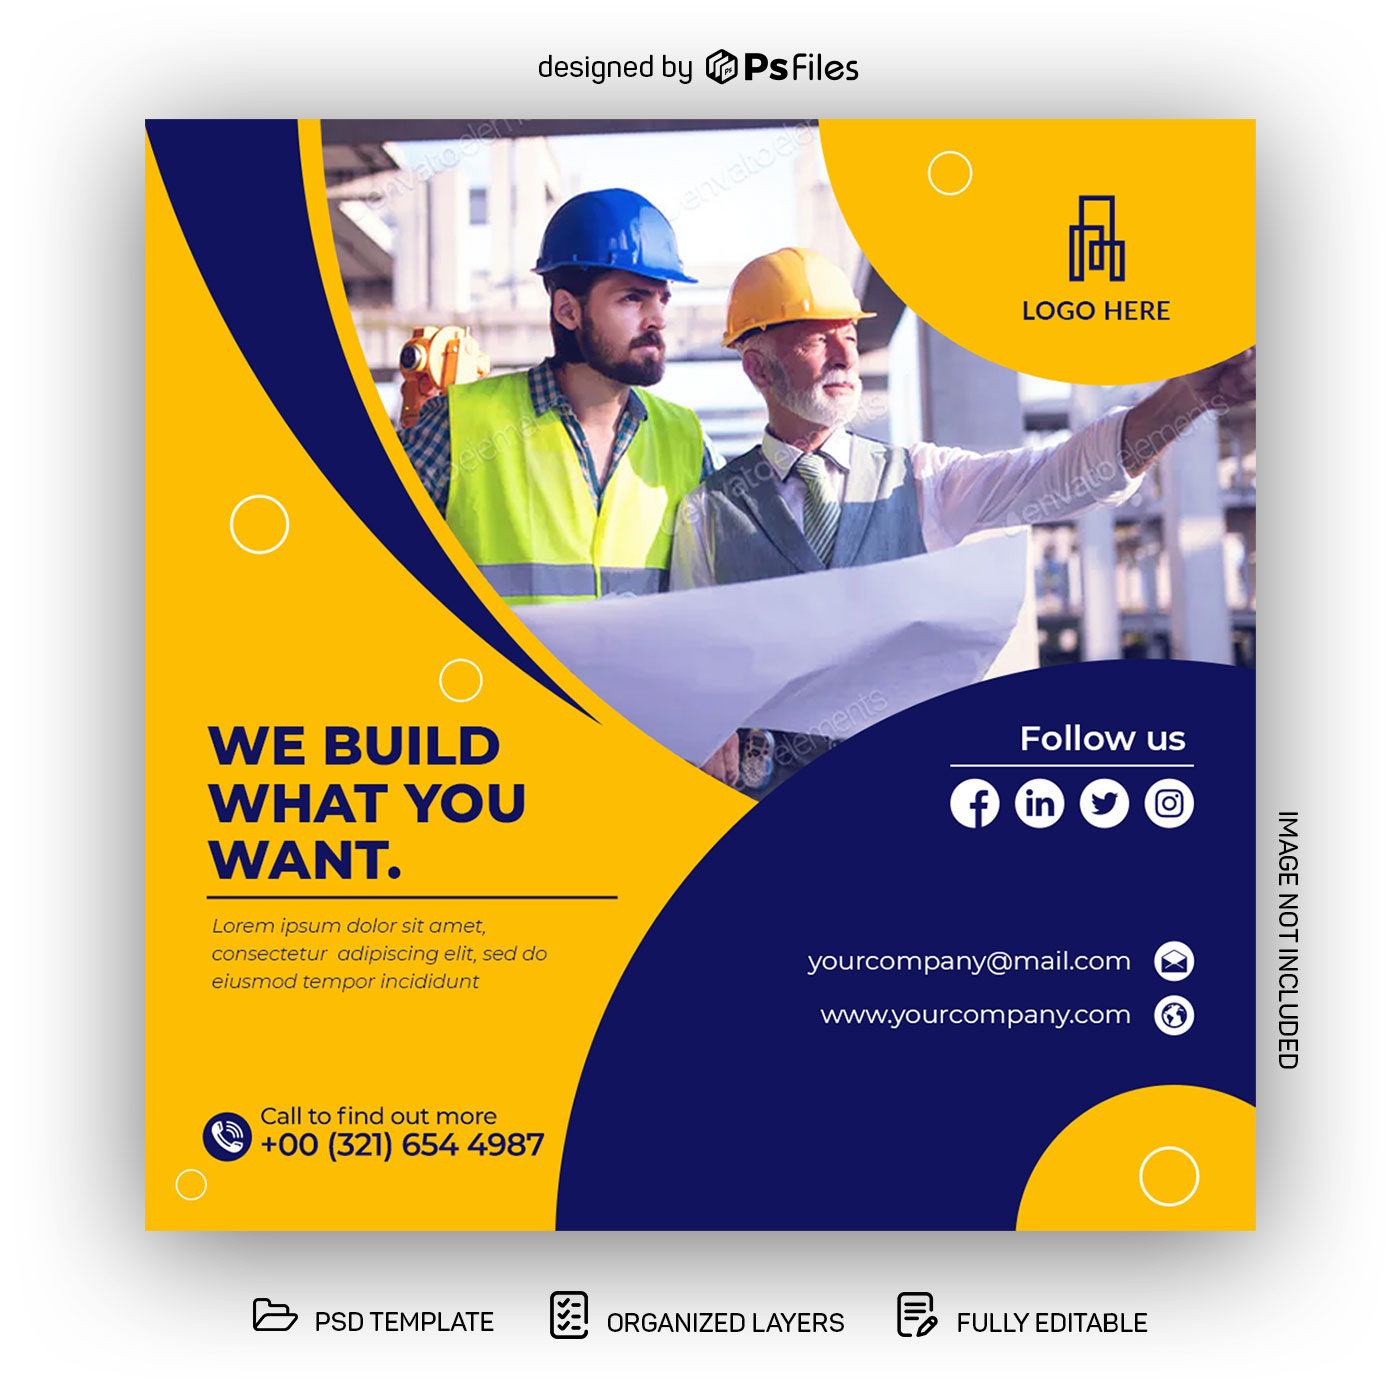 Yellow Blue Construction Company Instagram Post Design Template PSD